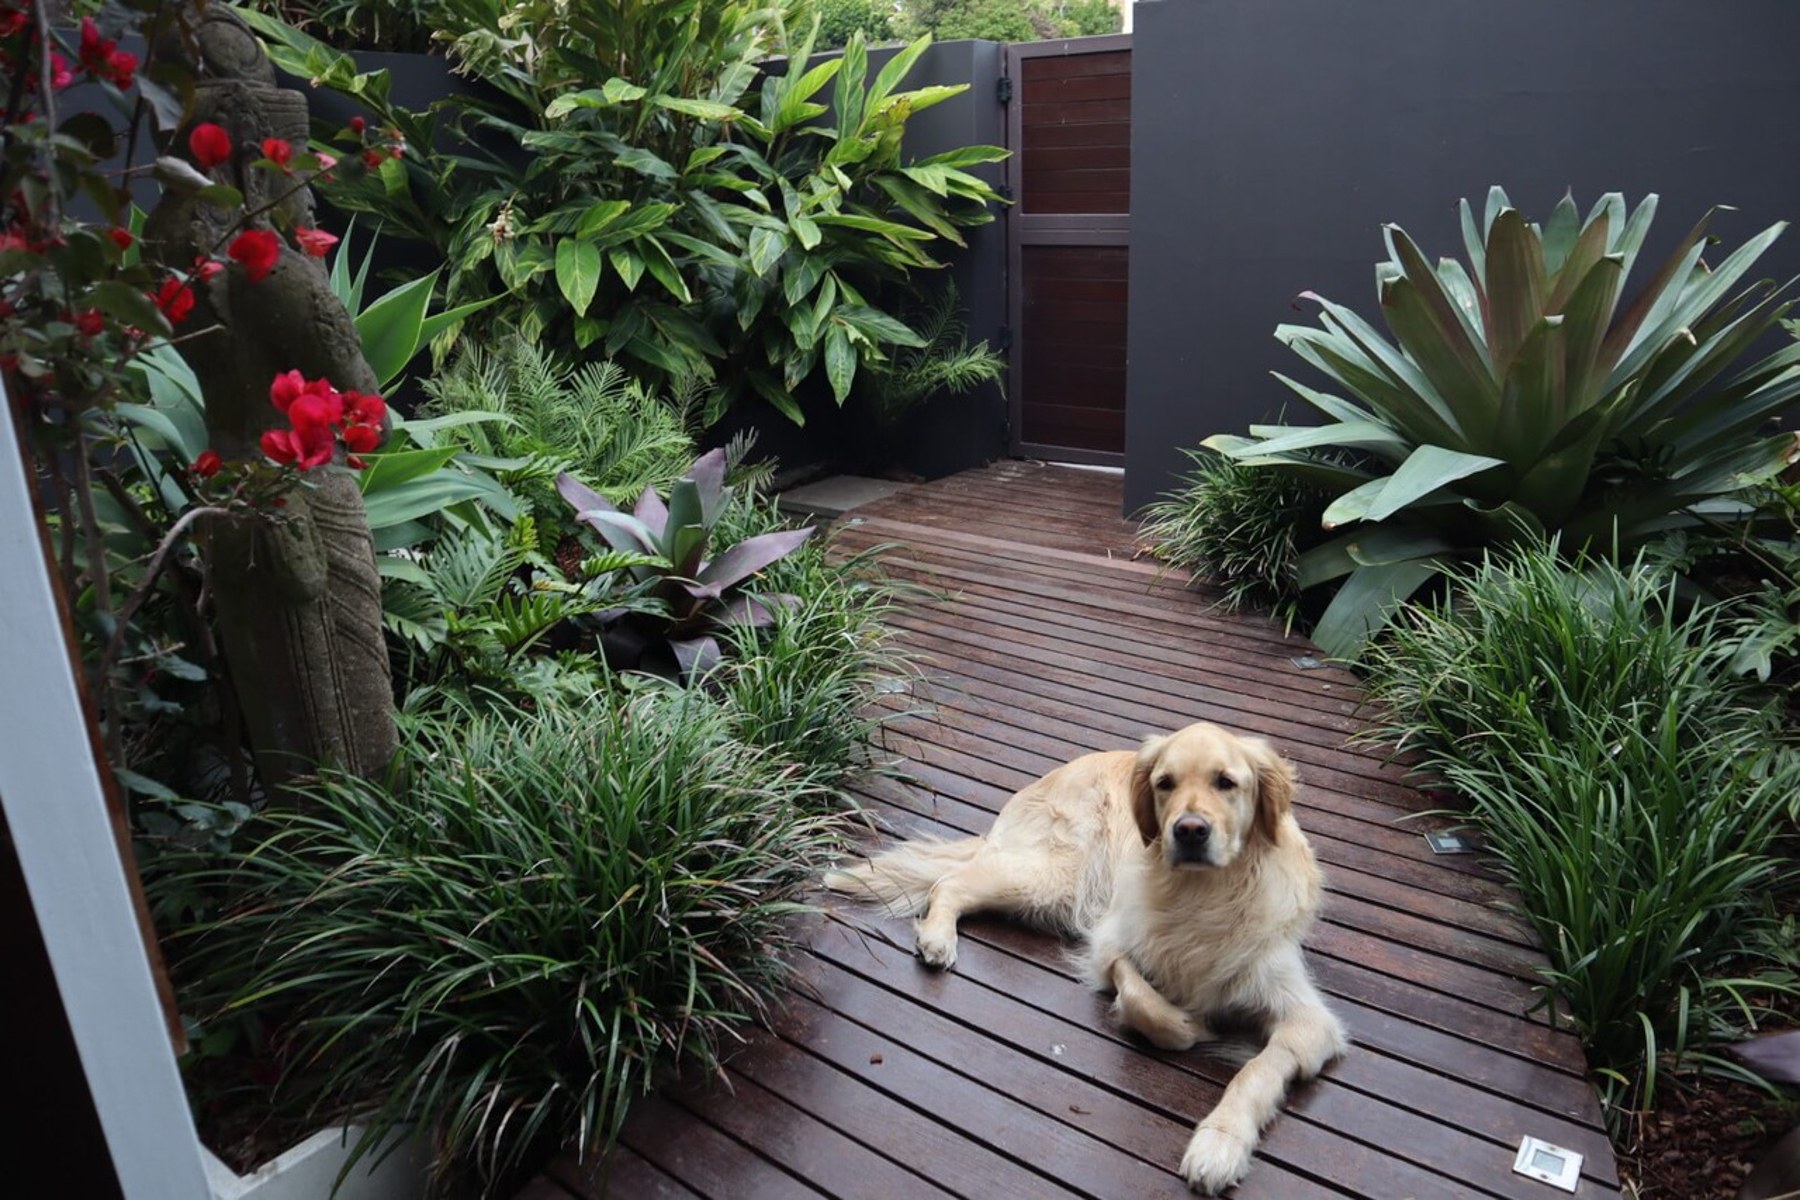 tropical paradise for our appreciative clients - young, old and 4-legged!